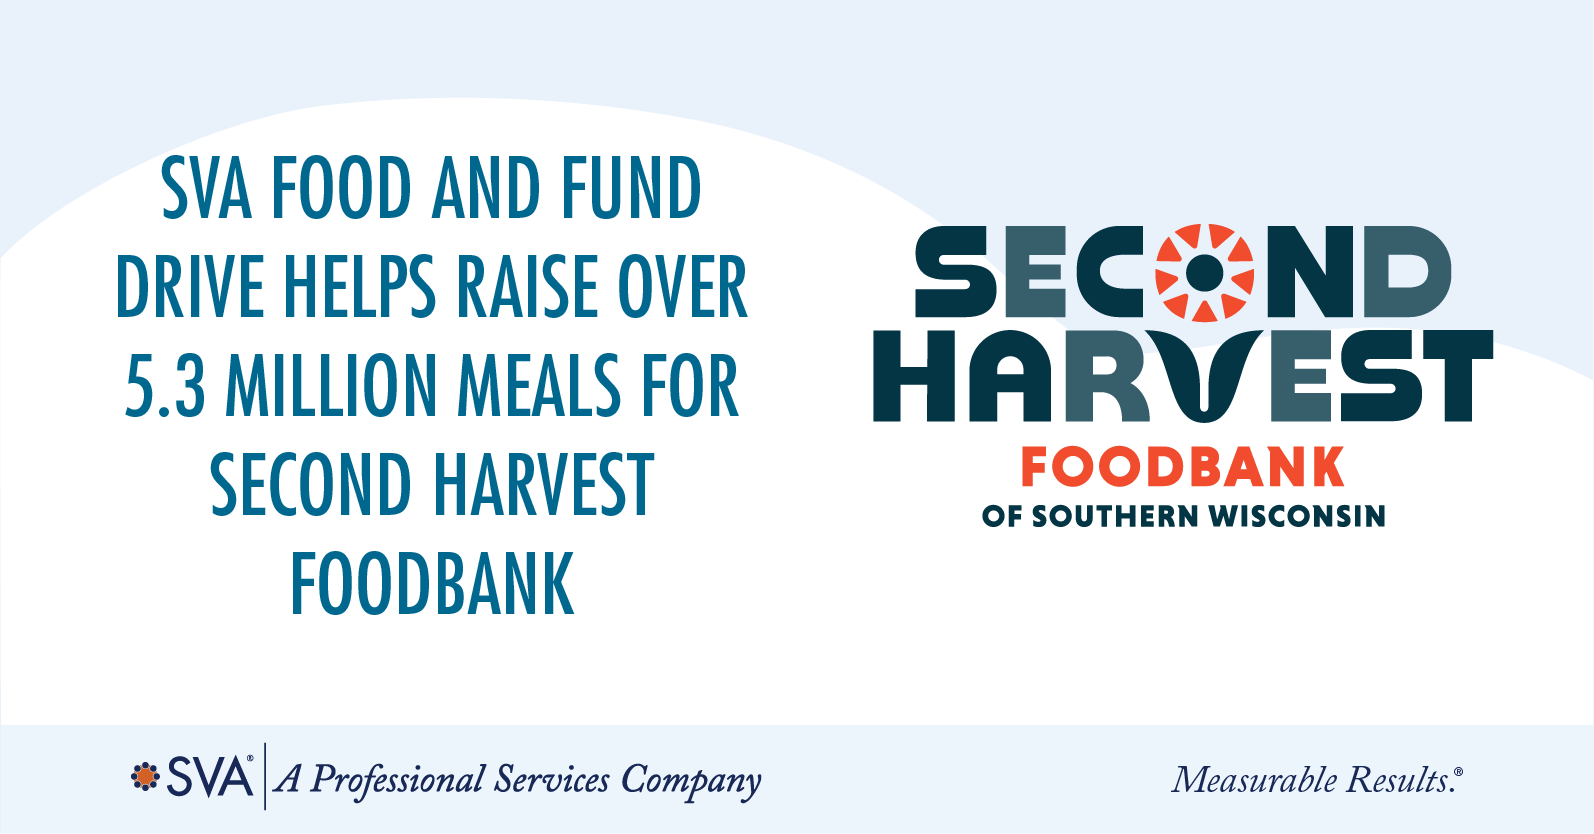 SVA Food and Fund Drive Helps Raise Over 5.3 Million Meals for Second Harvest Foodbank